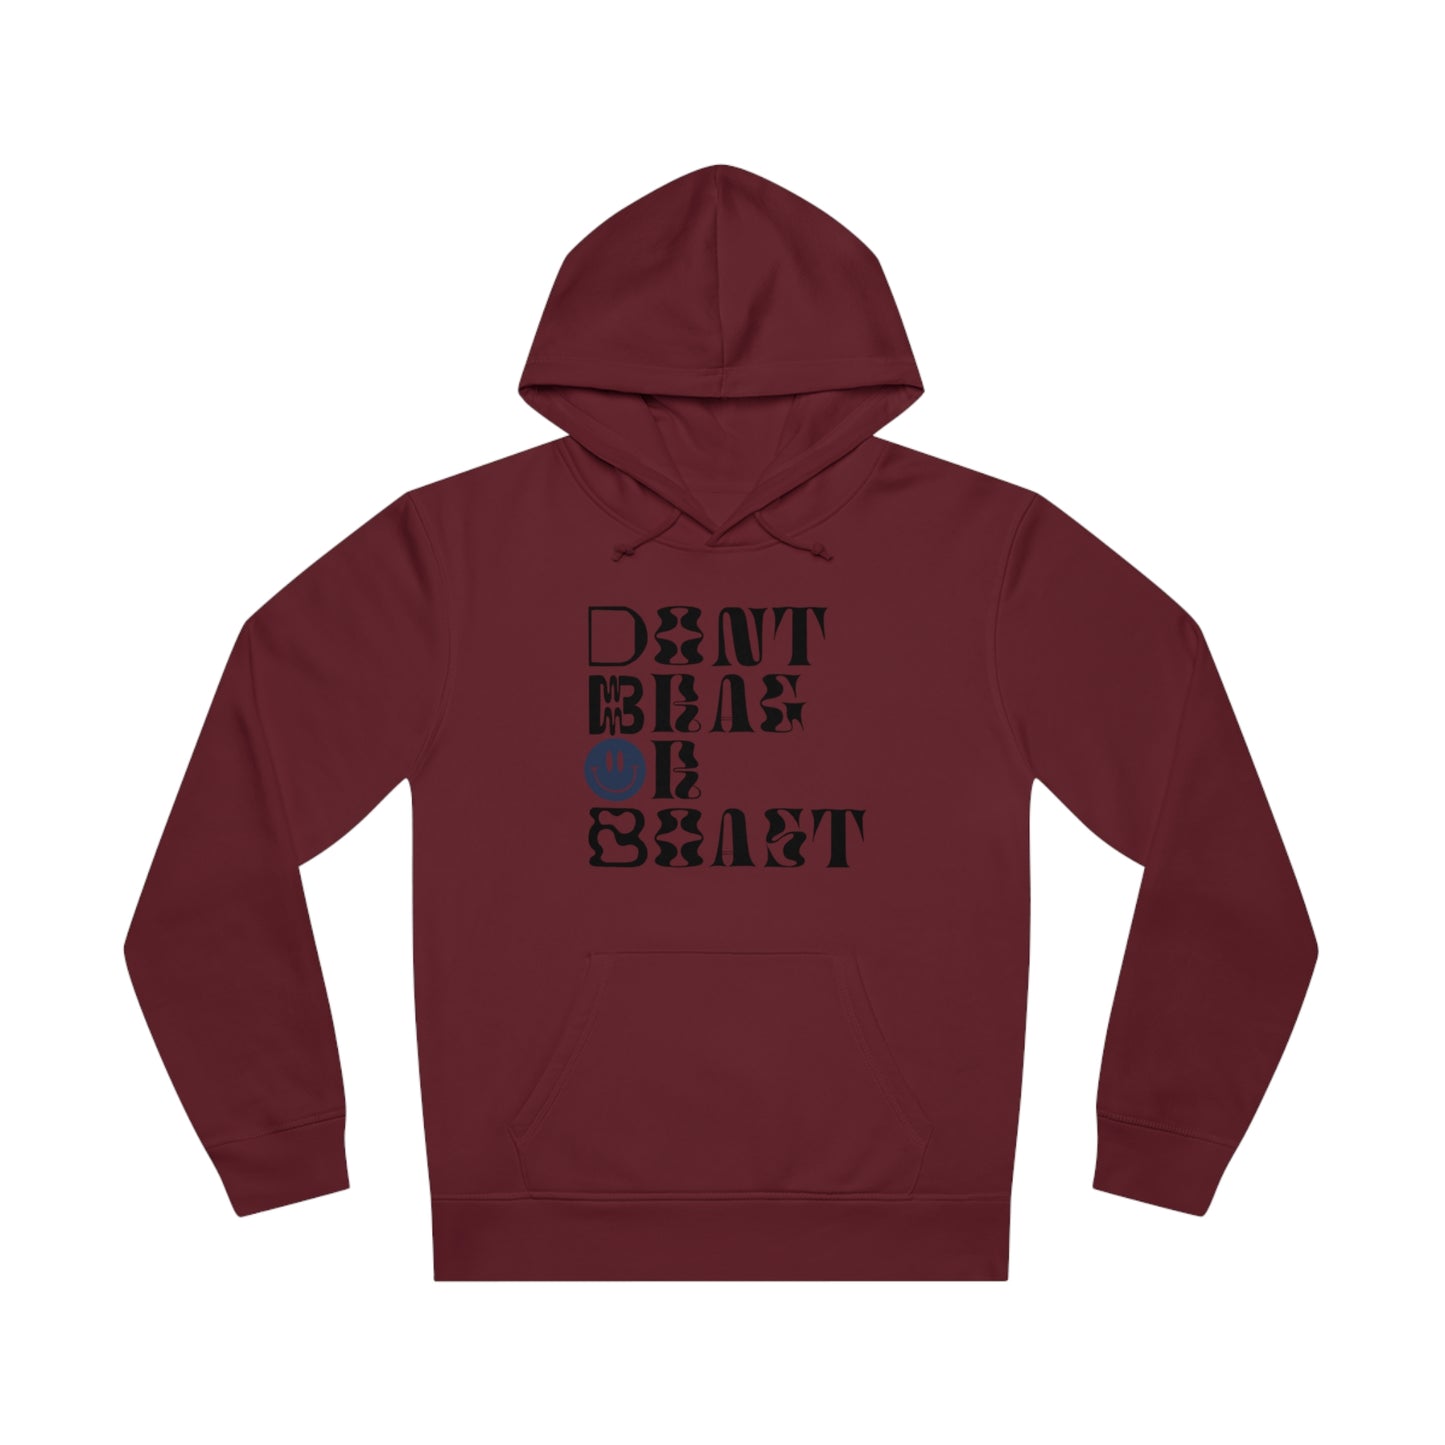 Don't Brag Or Boast Hoody (Front & Back)